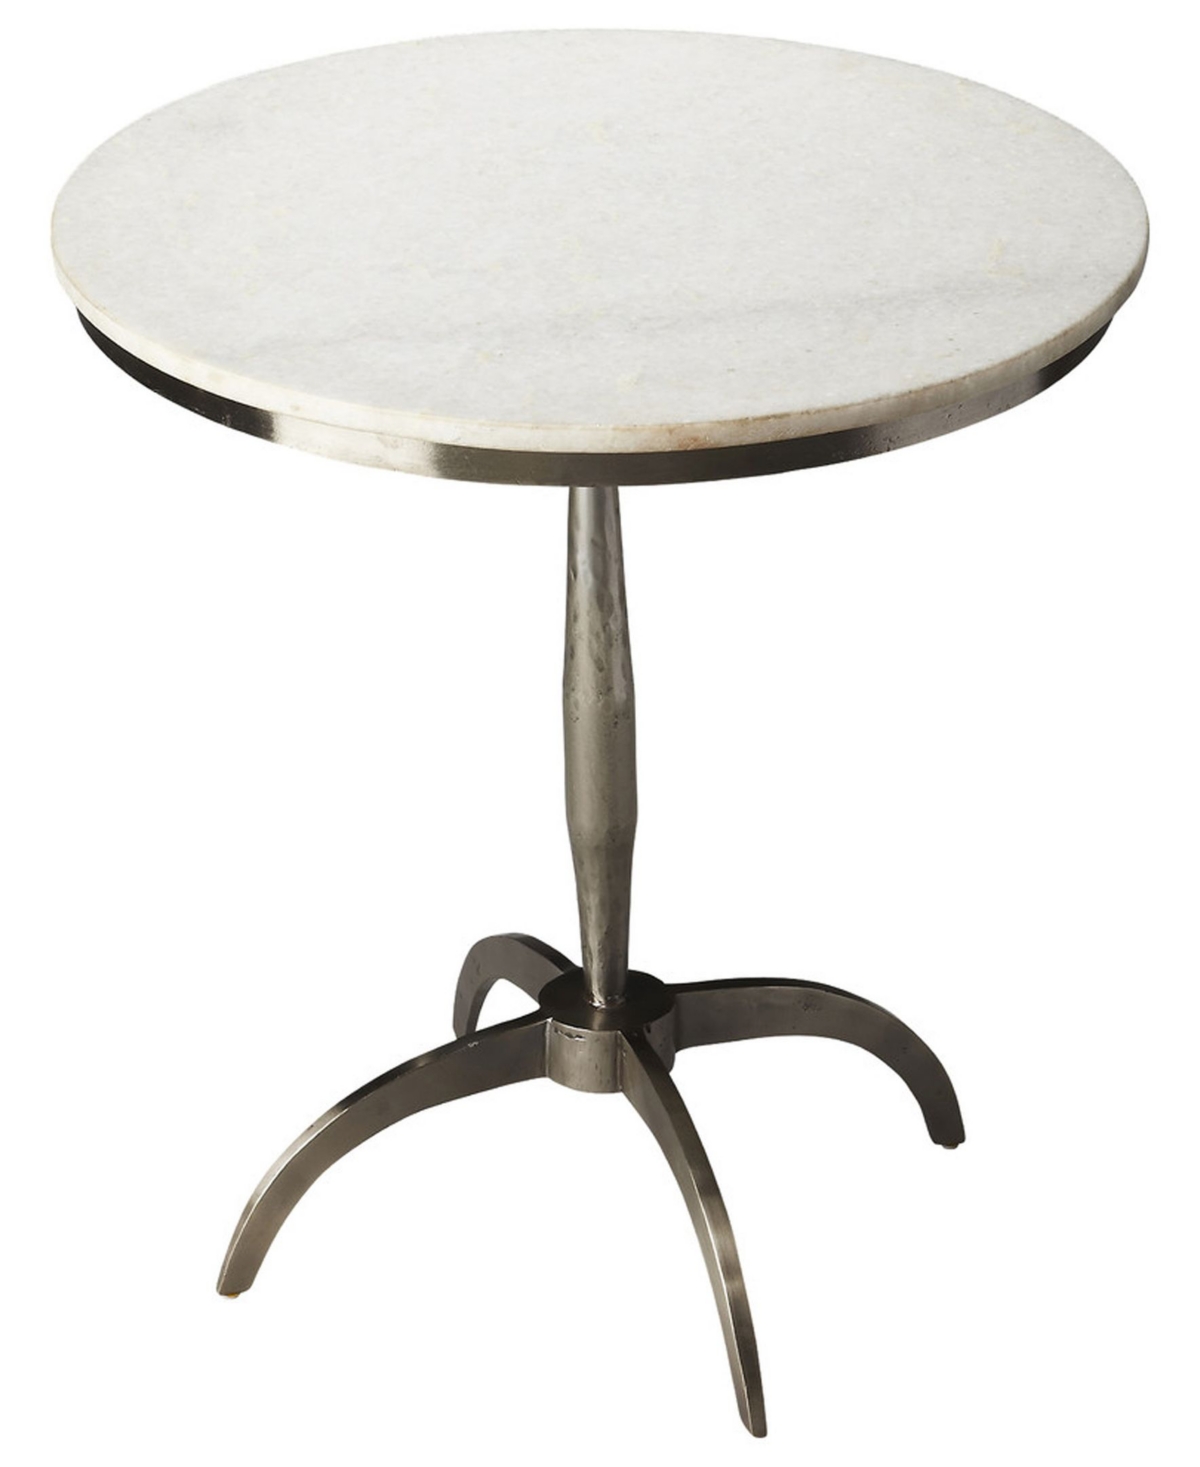 Butler Palmilla Accent Table